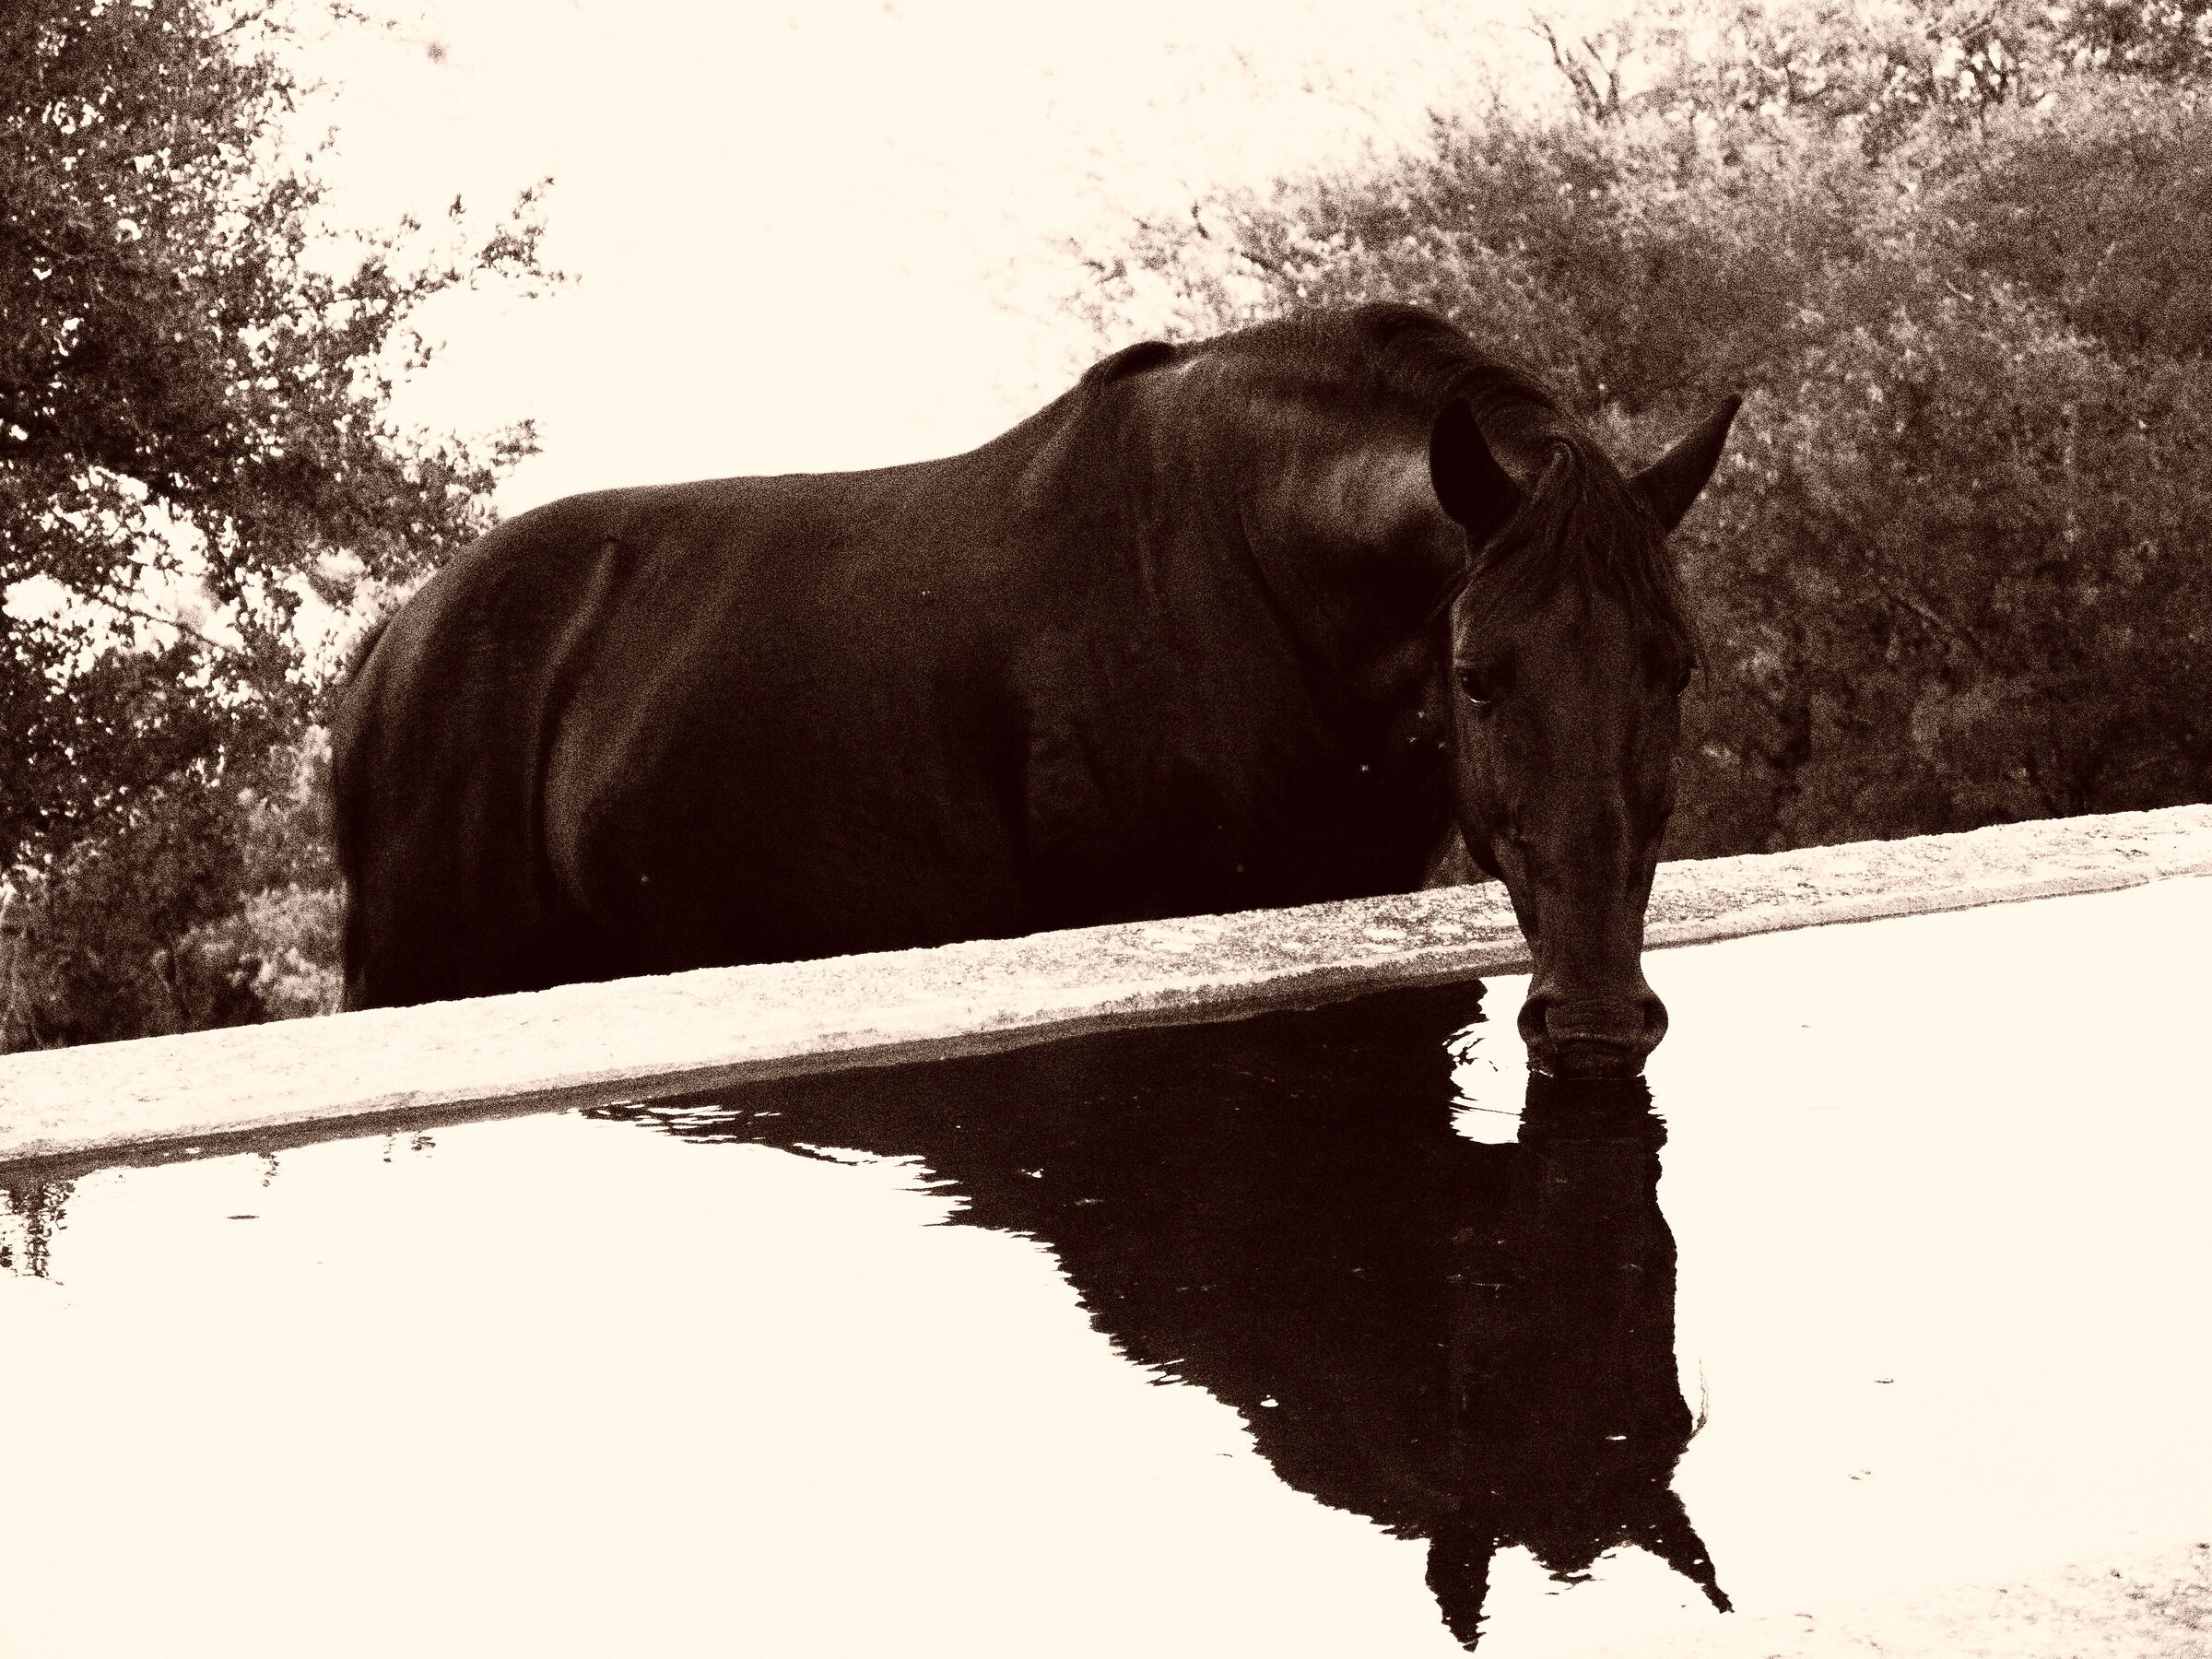 Tolfetano horse at the watering hole...